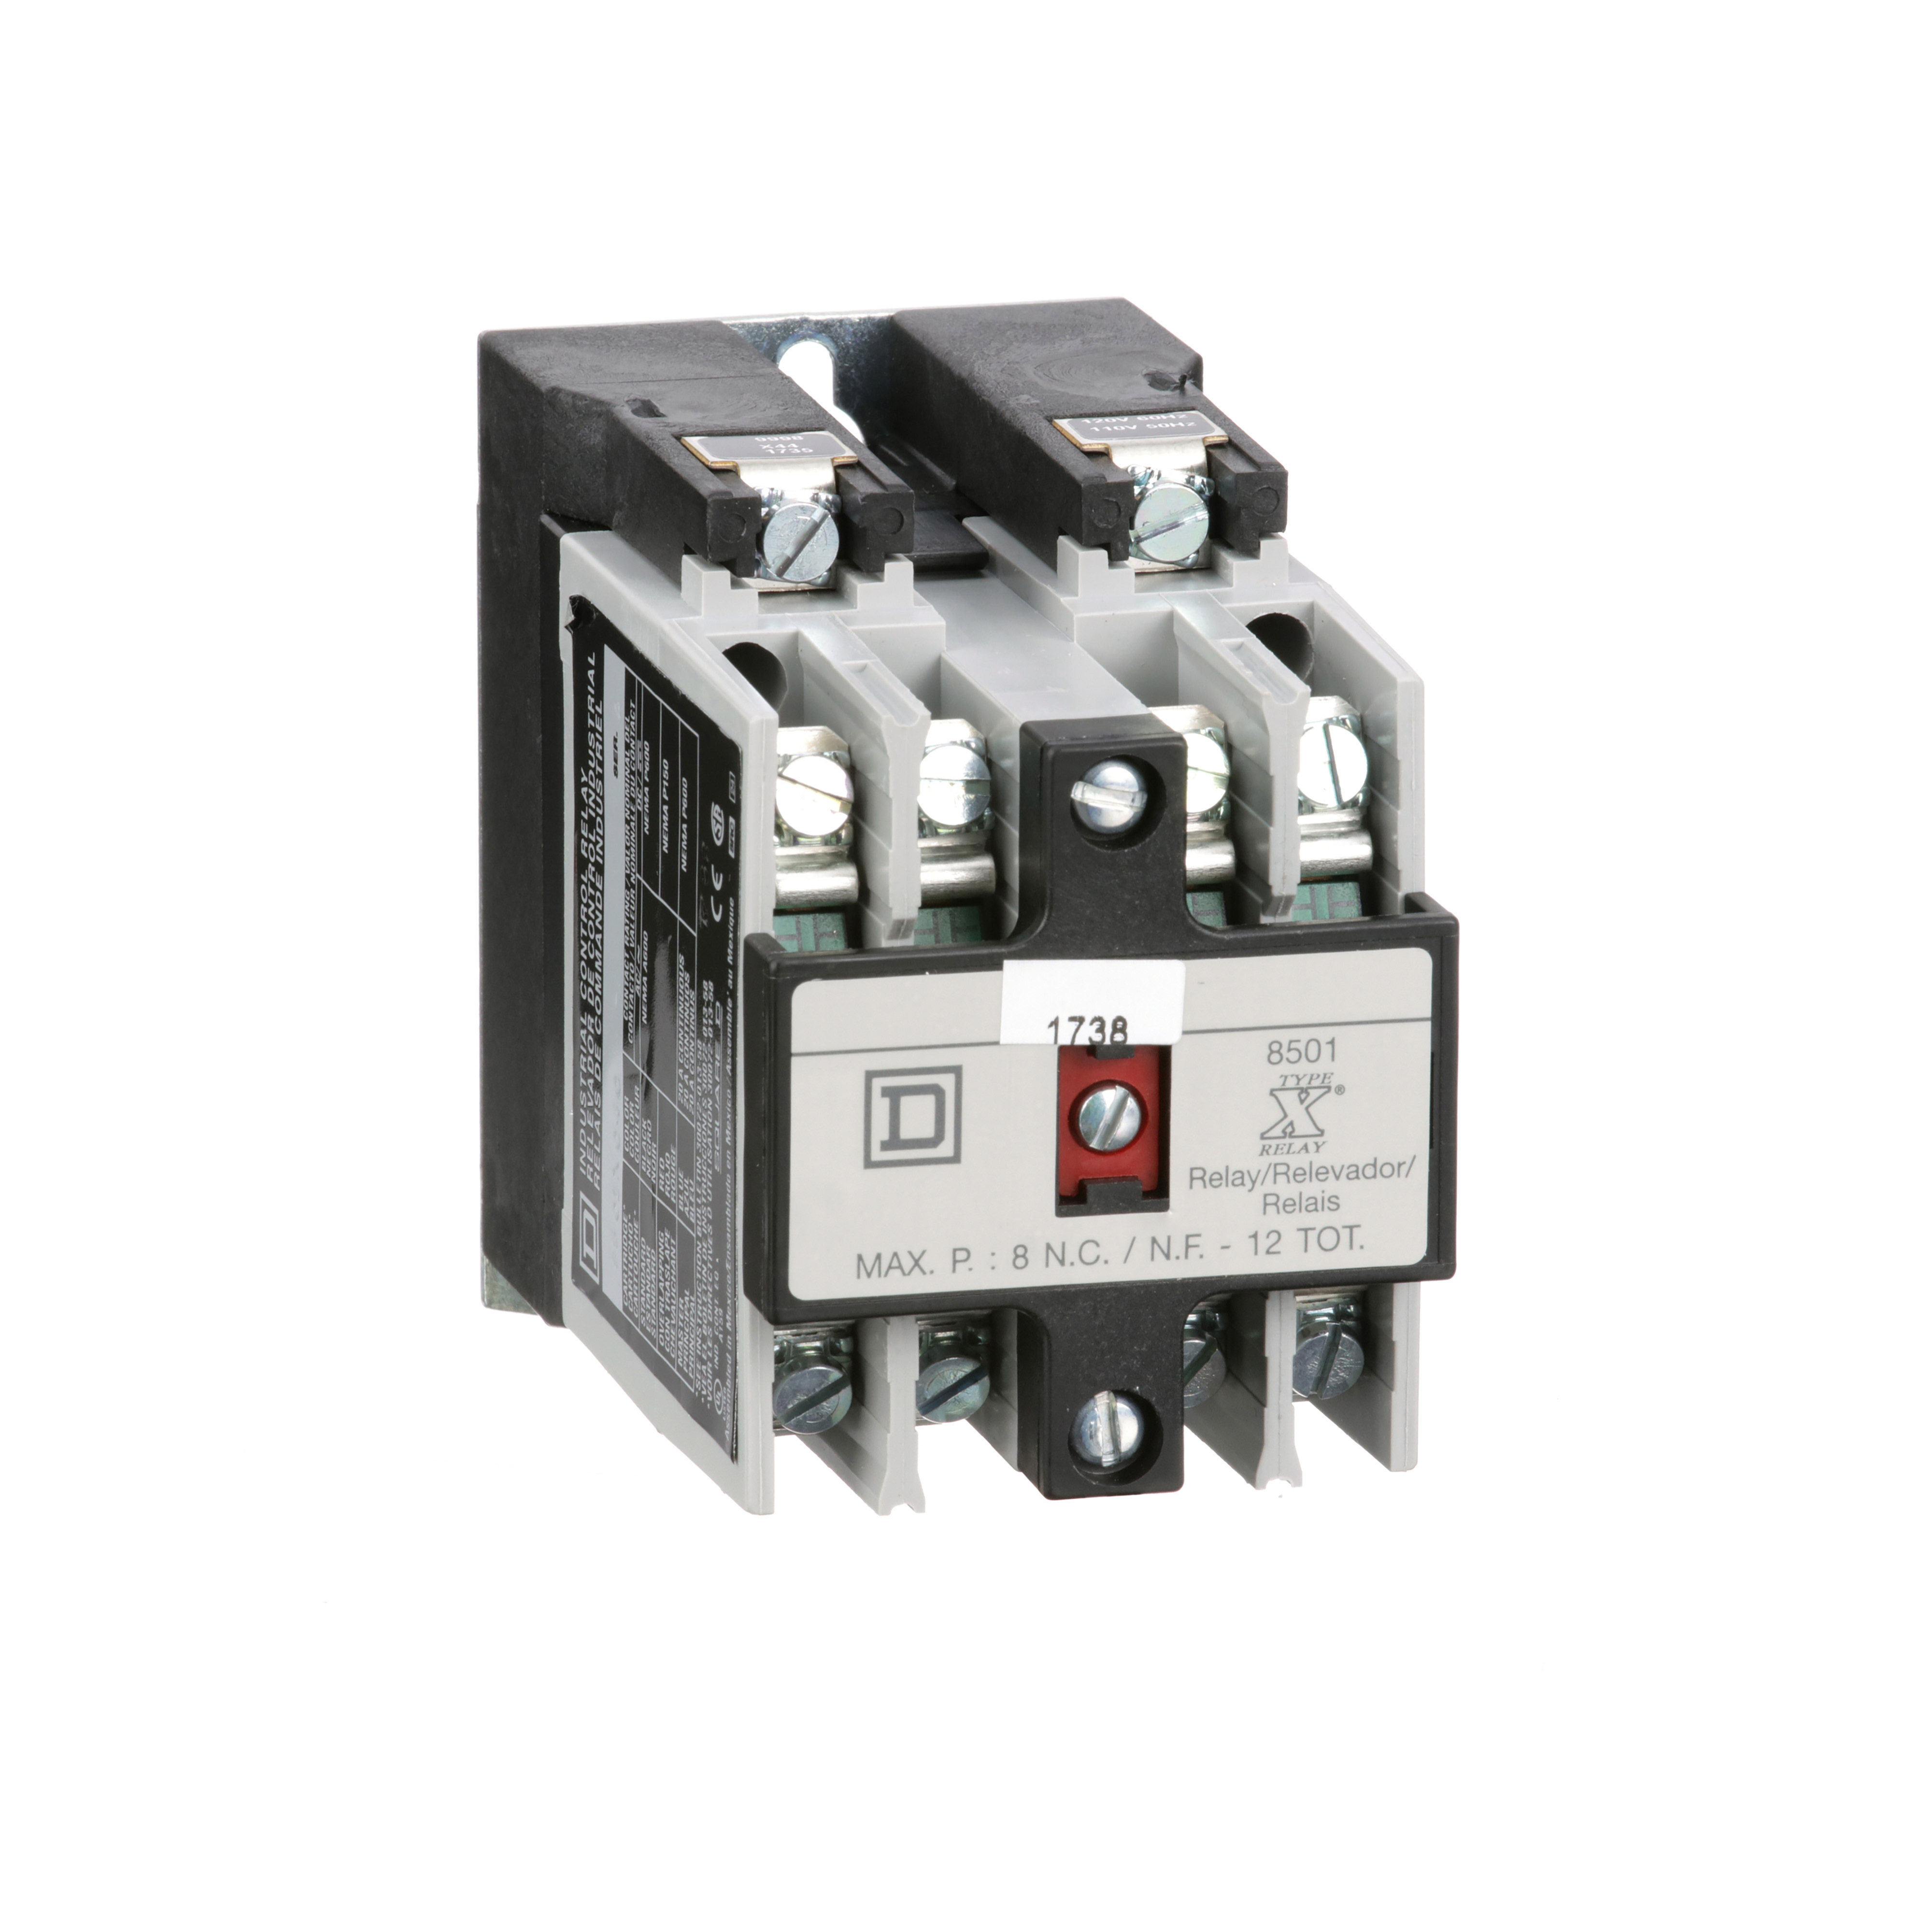 Details about   New Square D Class 8501 Type XO 40 A C Control Relay Series A 8501 XO40 